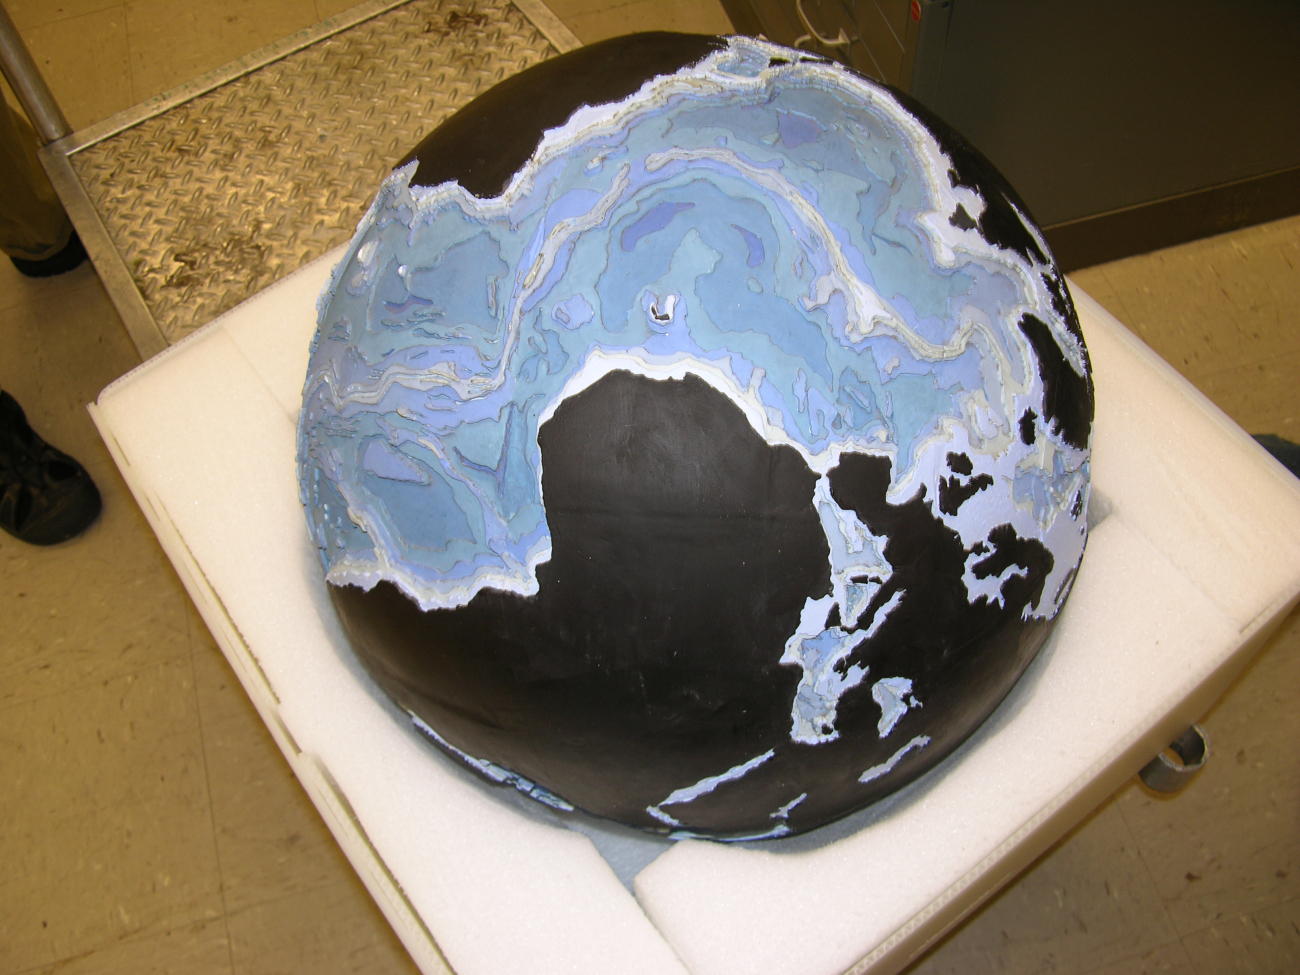 Stages in the production of the famous basketball bathymetric globe produced byBruce Heezen and Marie Tharp in their quest to understand the physiography ofthe seafloor